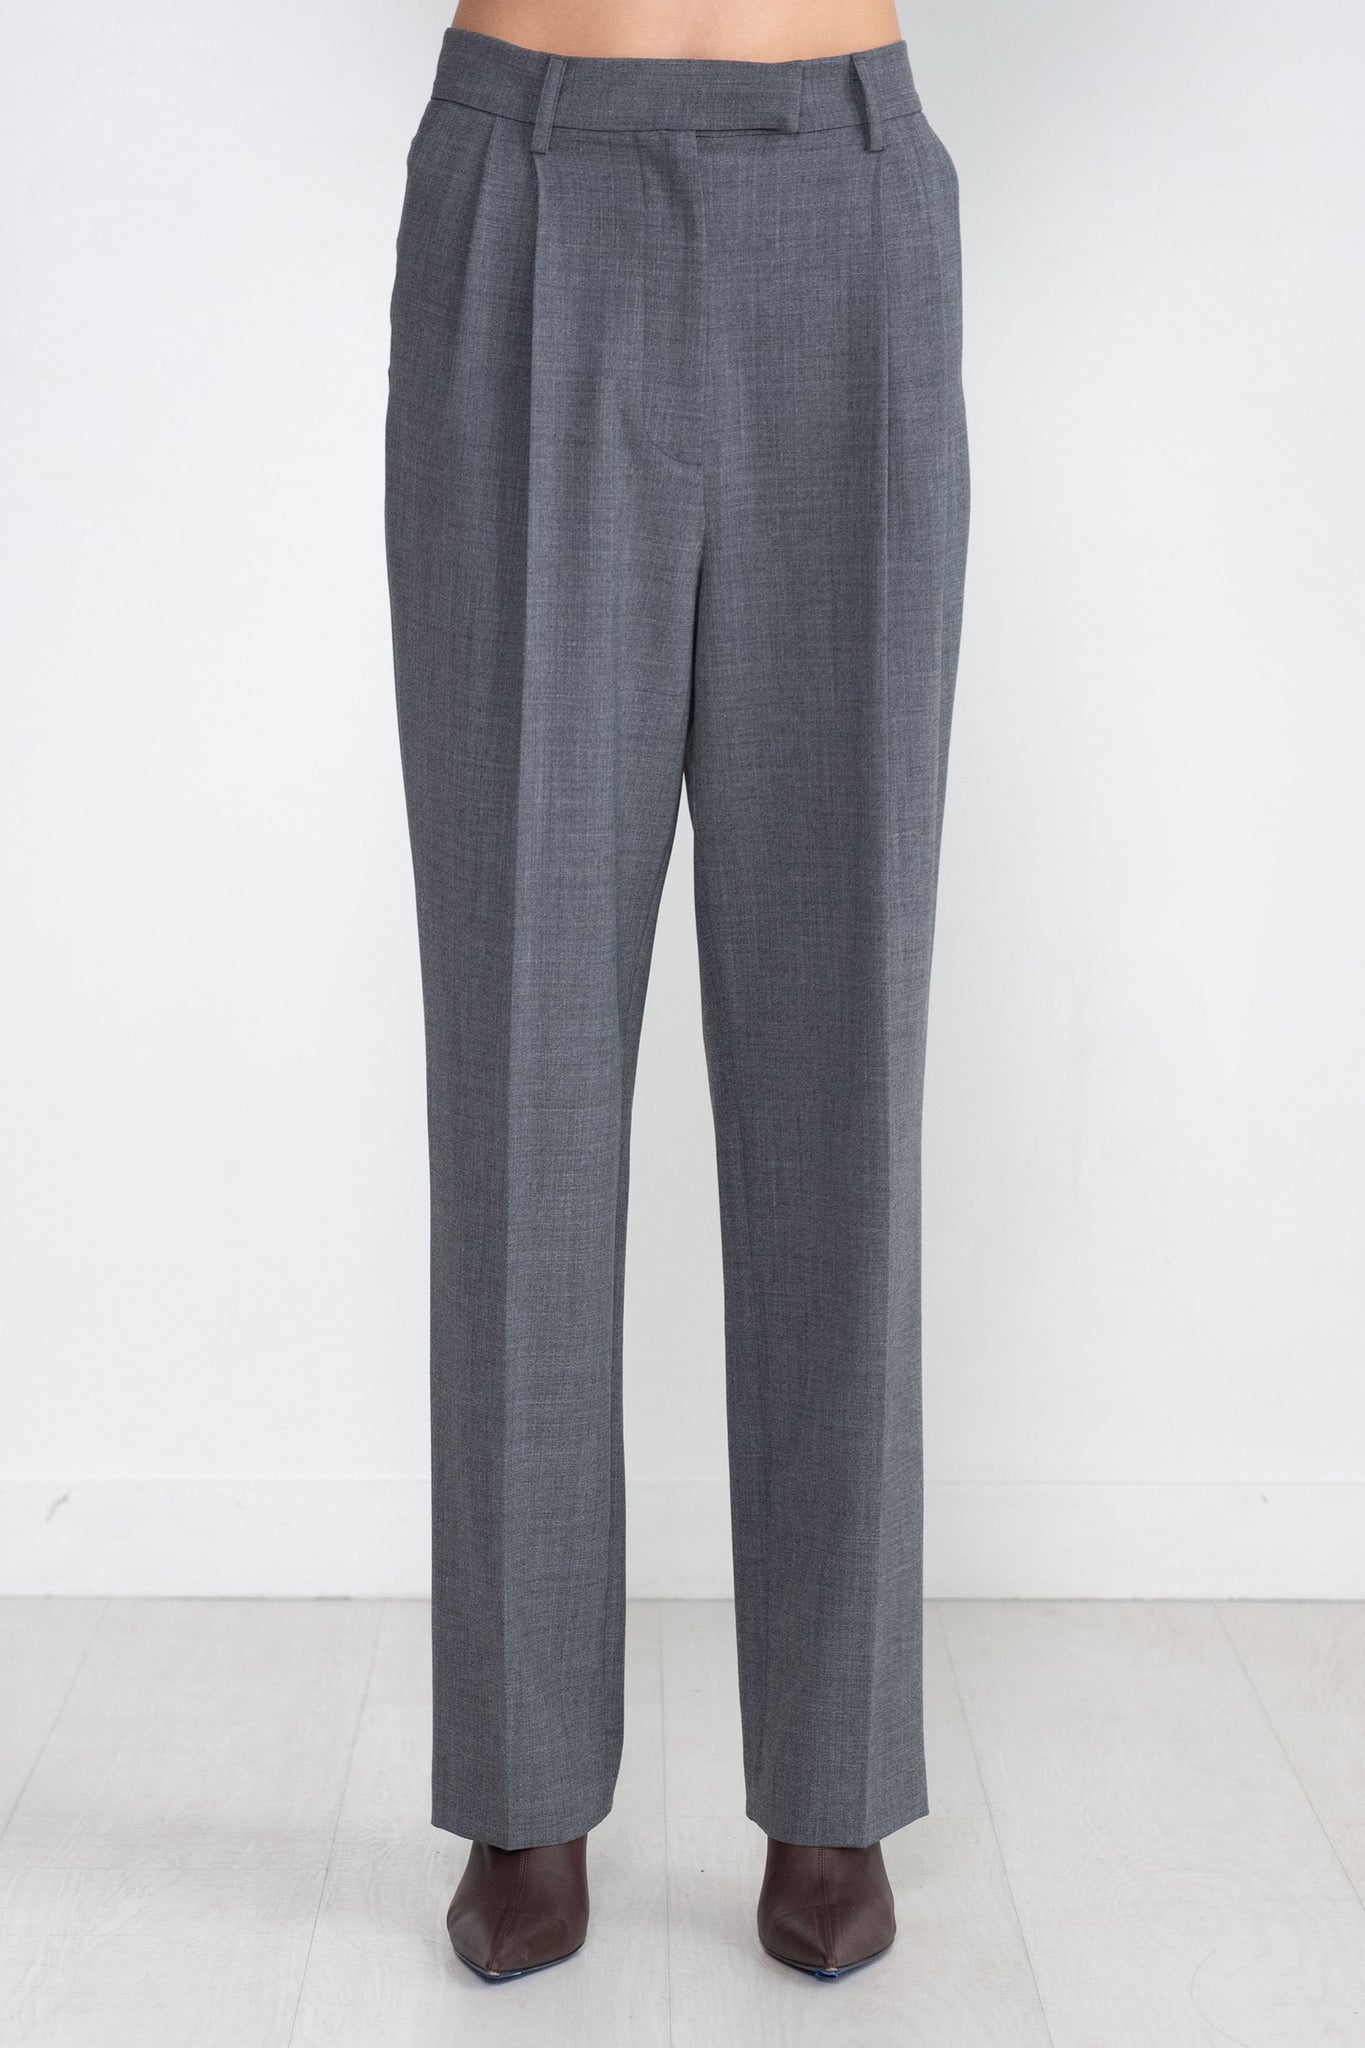 Hache - NYC Daily Trousers, Light Grey